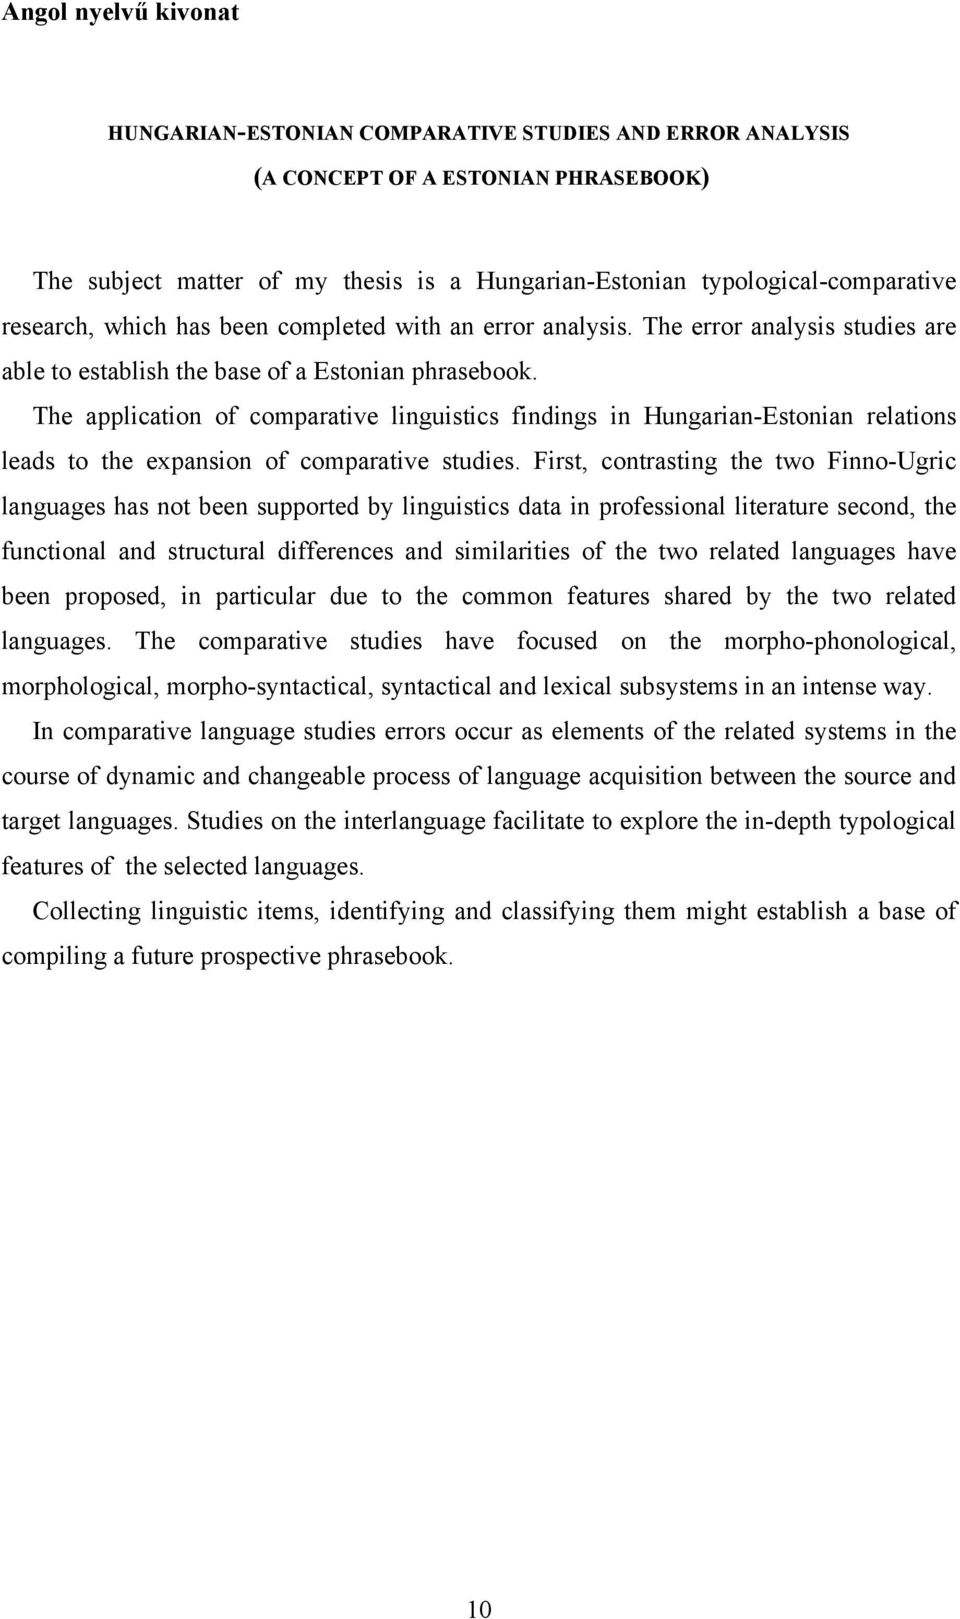 The application of comparative linguistics findings in Hungarian-Estonian relations leads to the expansion of comparative studies.